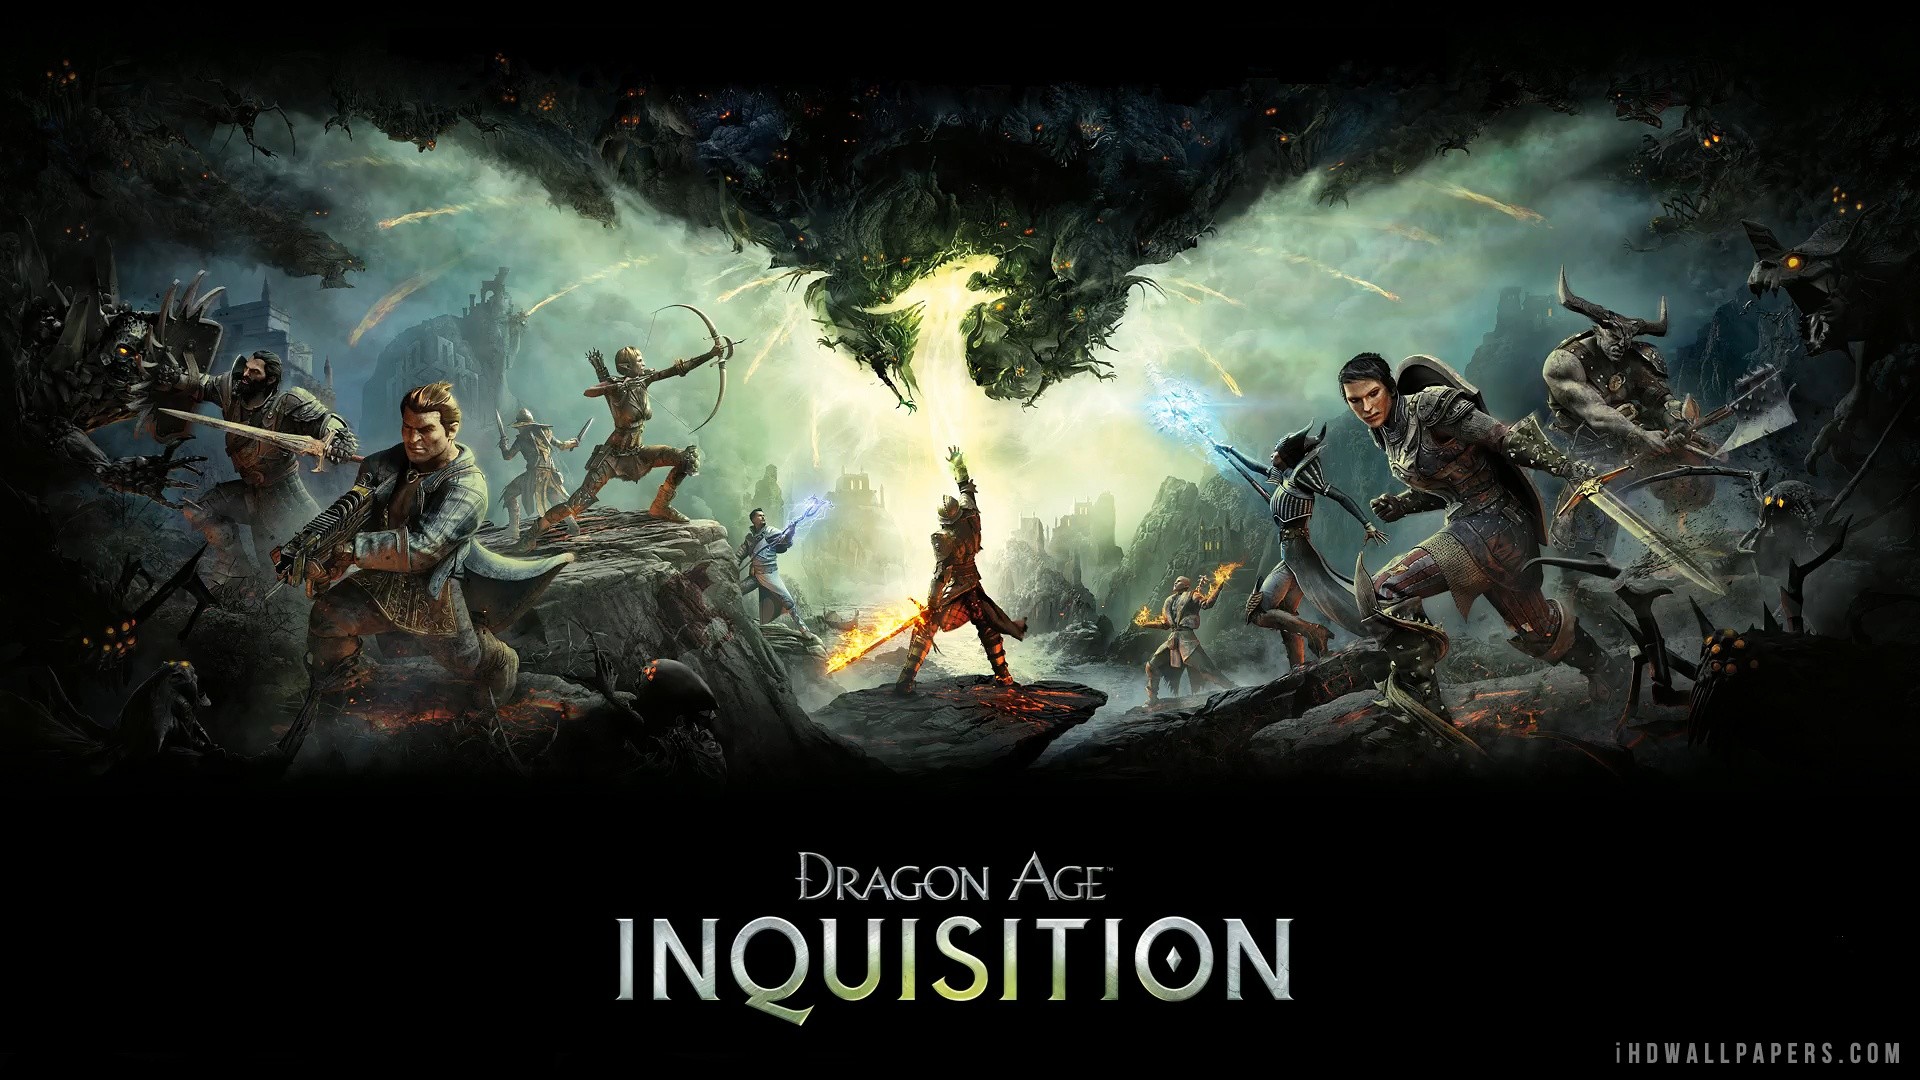 1920x1080 Dragon Age Inquisition HD Wallpaper iHD Wallpapers 